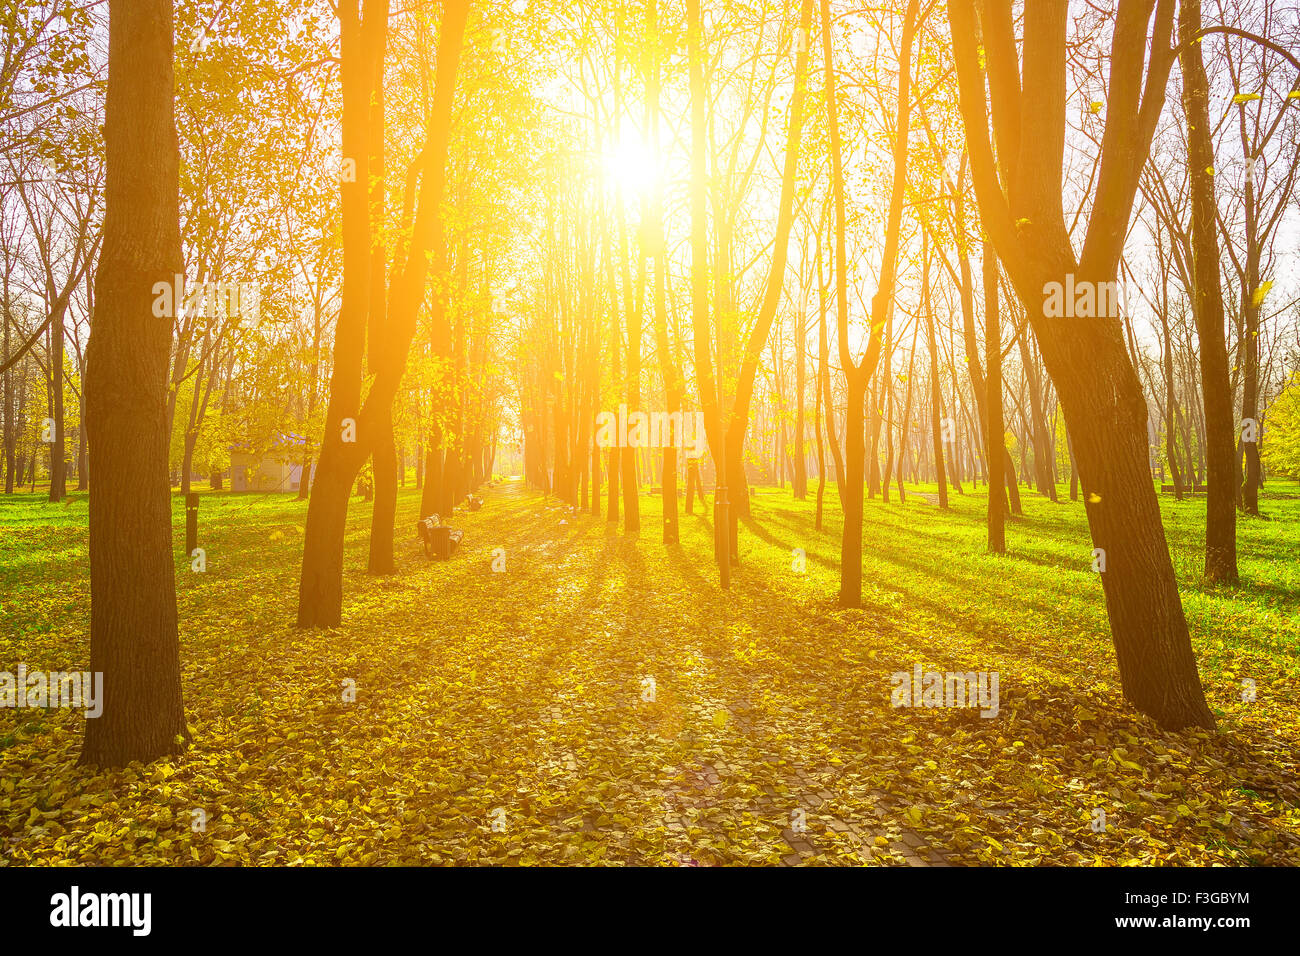 Autumn Scenery of Alley in Yellow and Dry  Leaves, Rays of the Sun Shining Through the Branches of Trees in Park Stock Photo